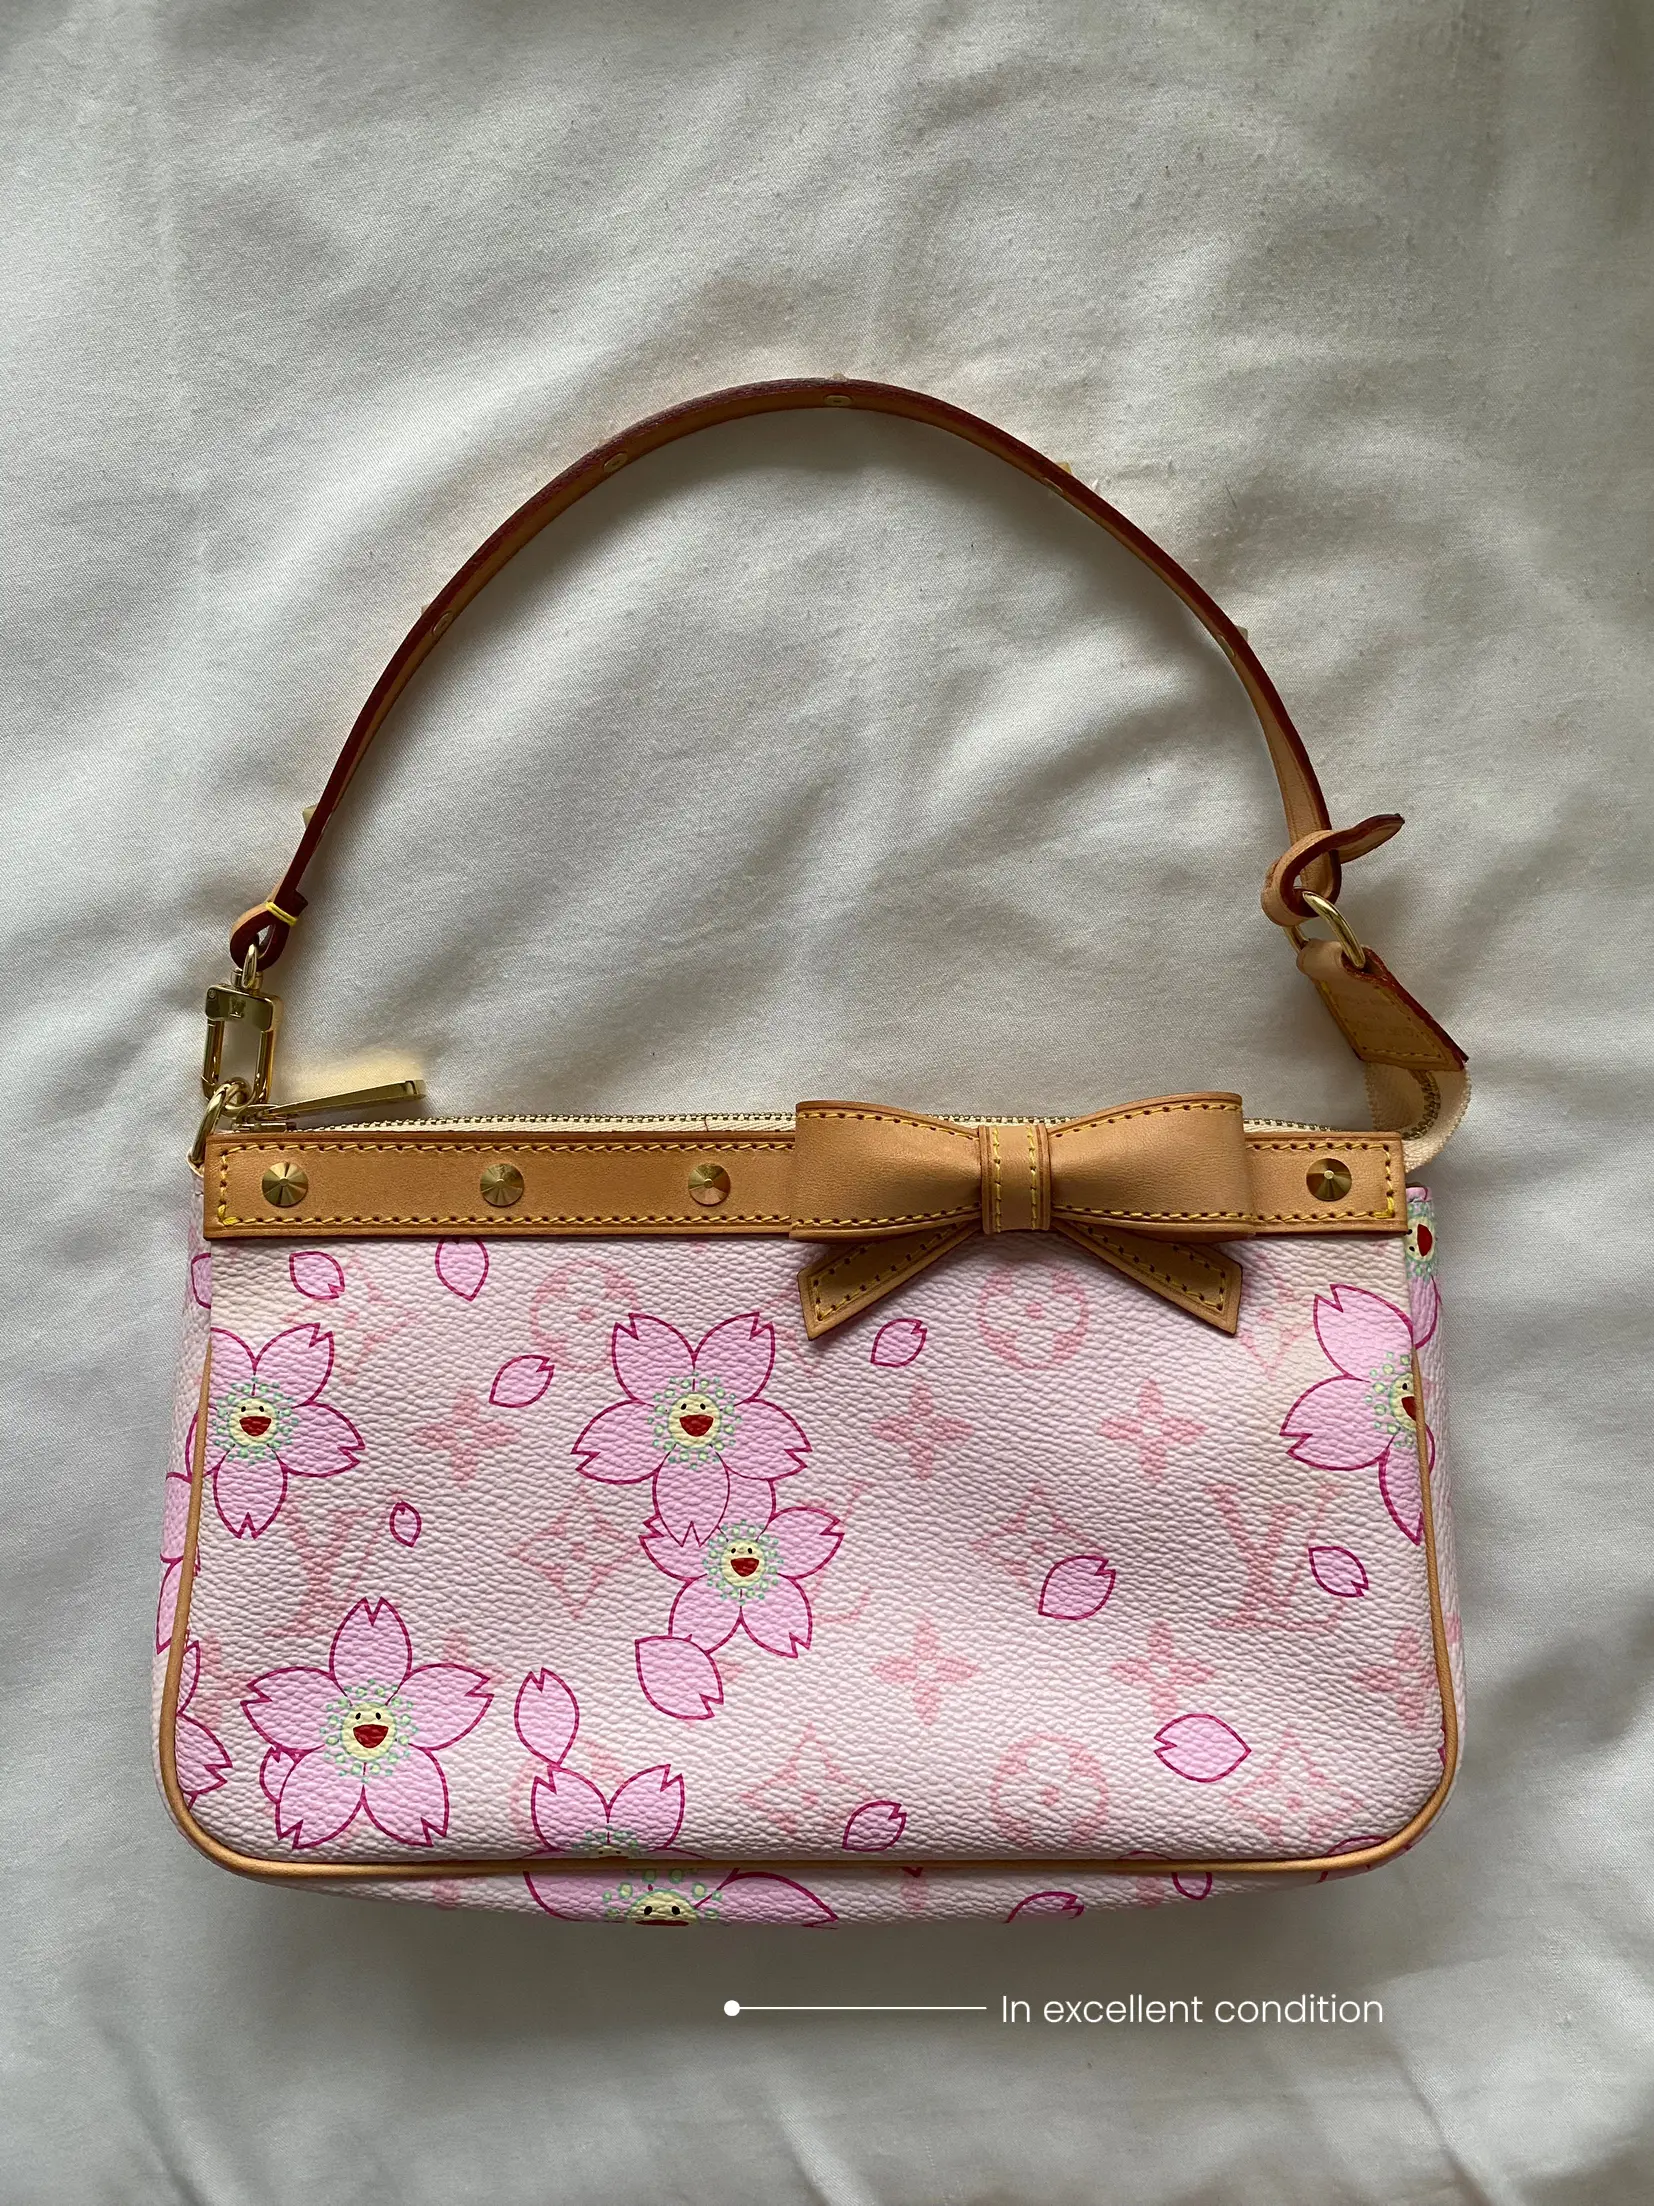 I got myself Regina George's bag (for real)…🎀🌸, Gallery posted by VAL